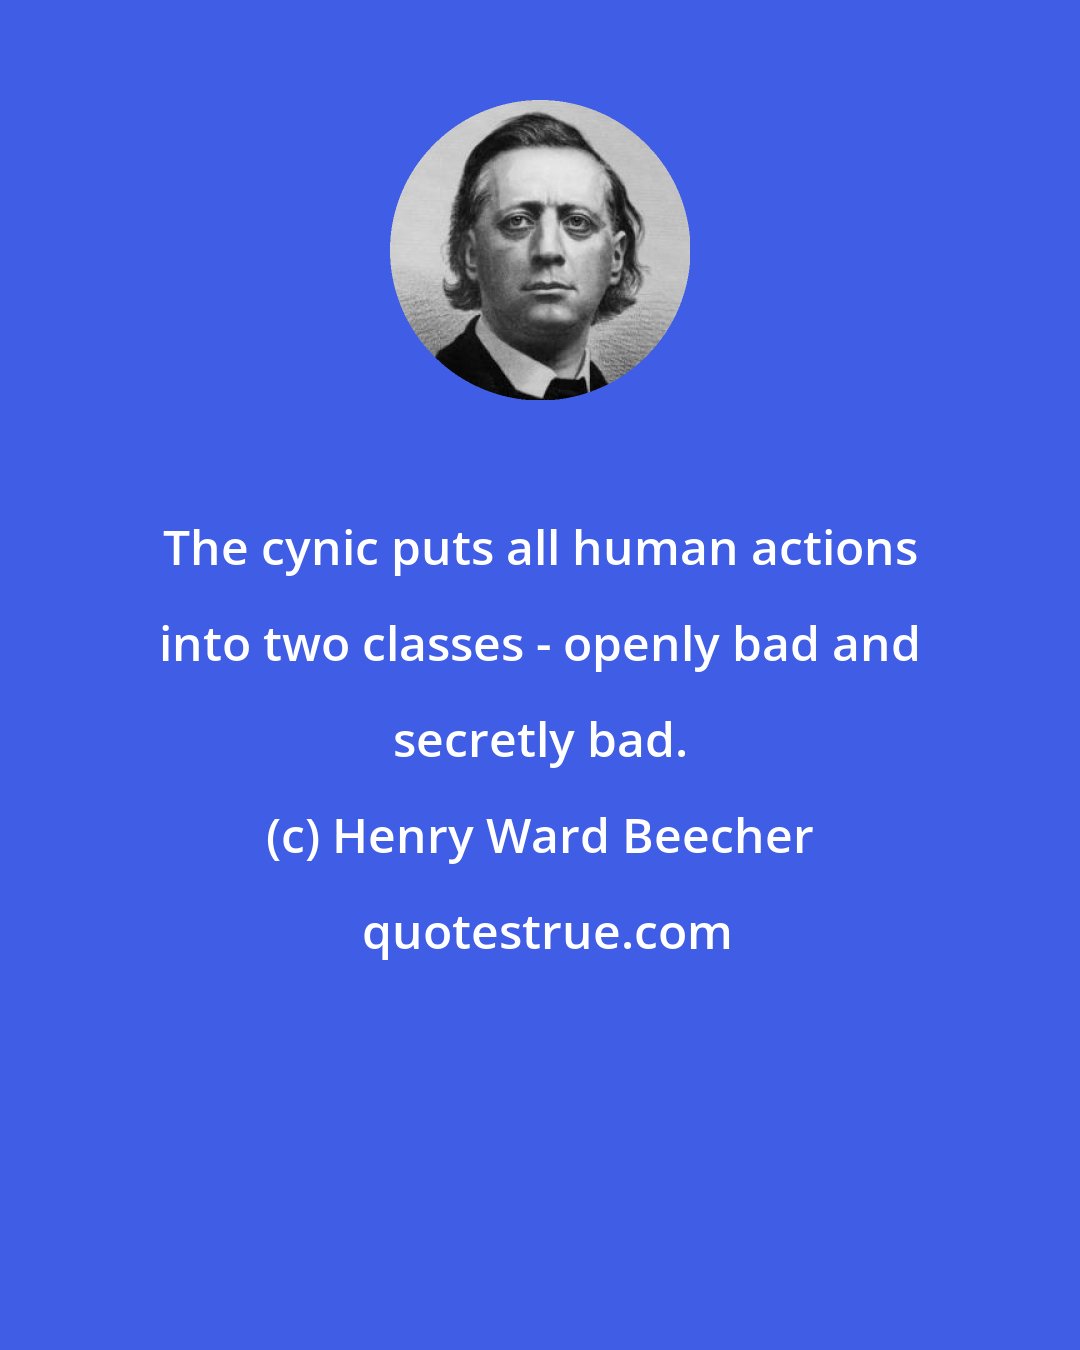 Henry Ward Beecher: The cynic puts all human actions into two classes - openly bad and secretly bad.